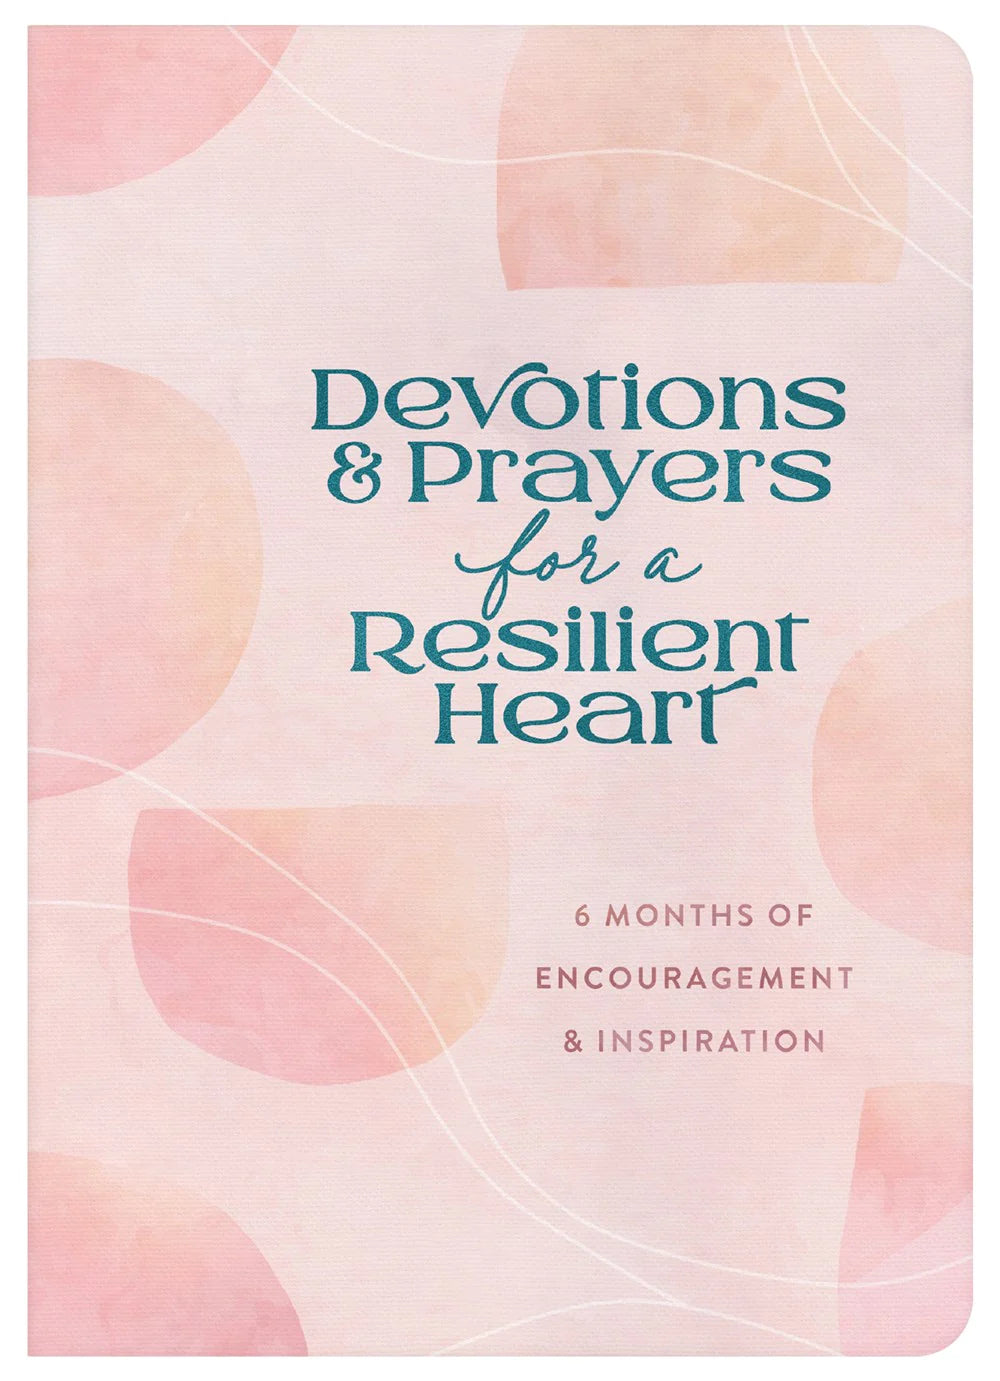 Devotions and Prayers for a Resilient Heart - 6 Months of Encouragement and Inspiration Devotional Book